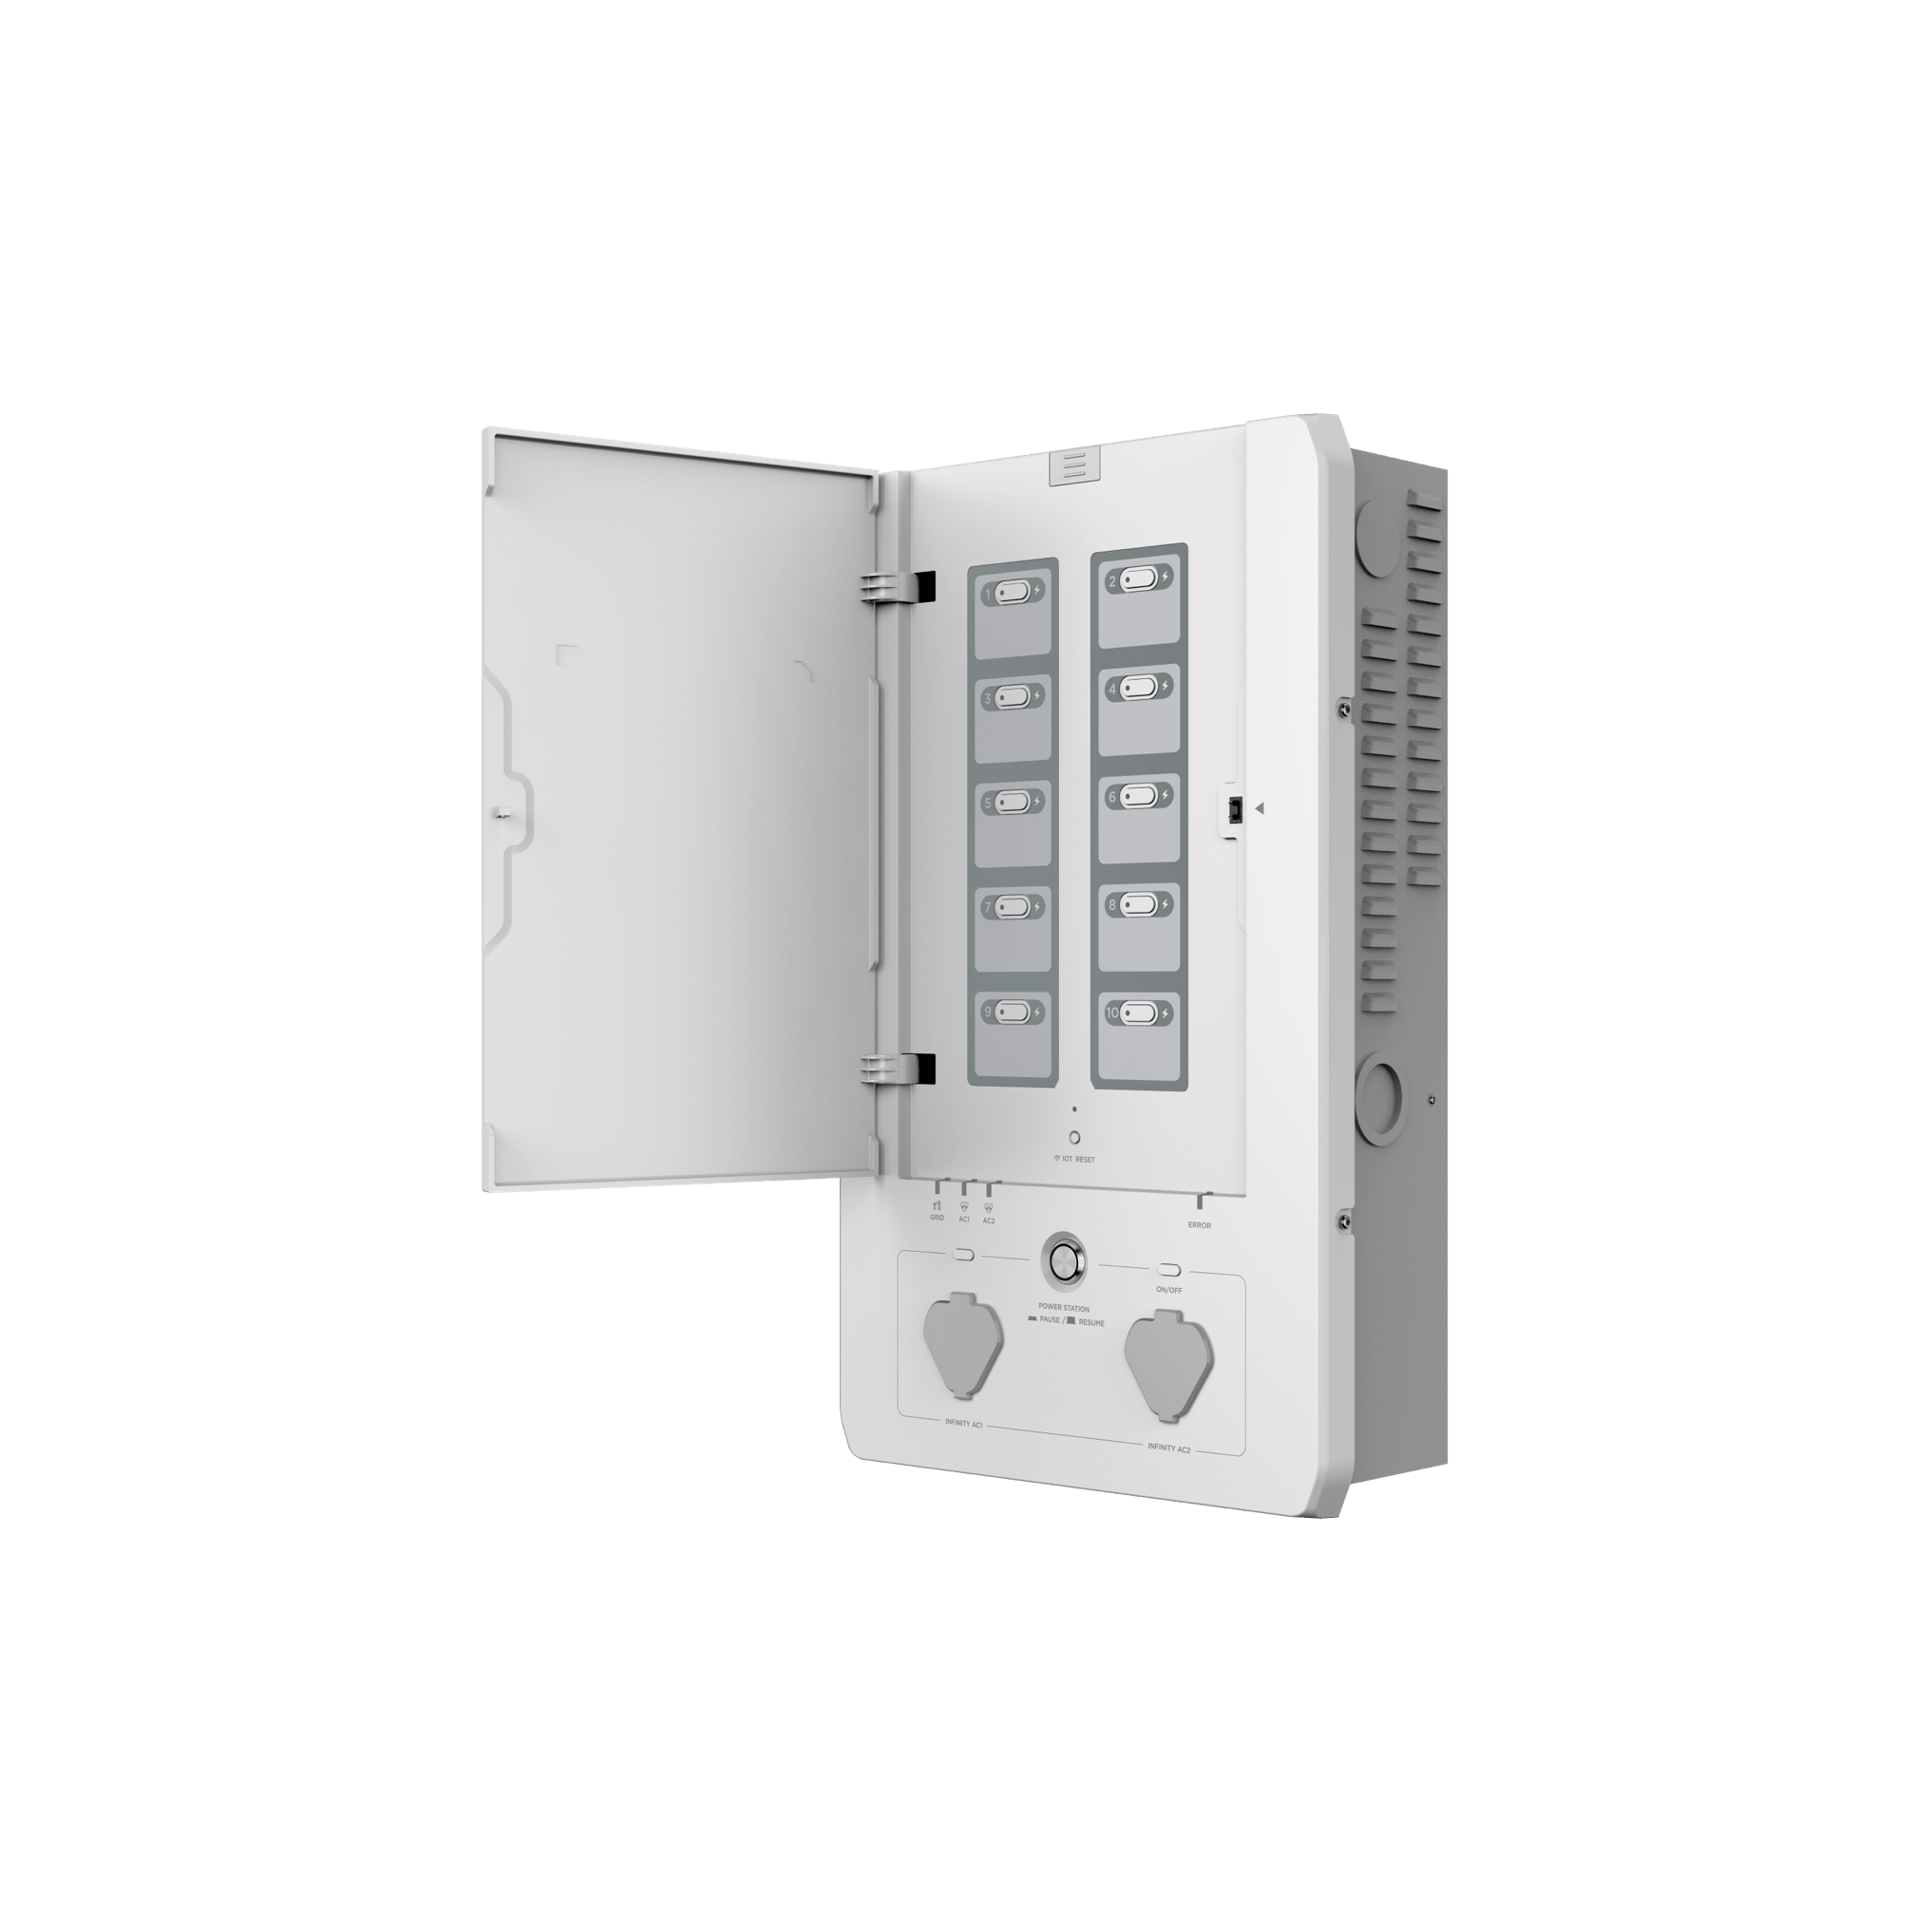 EcoFlow Smart Home Panel (Recommended Accessory)